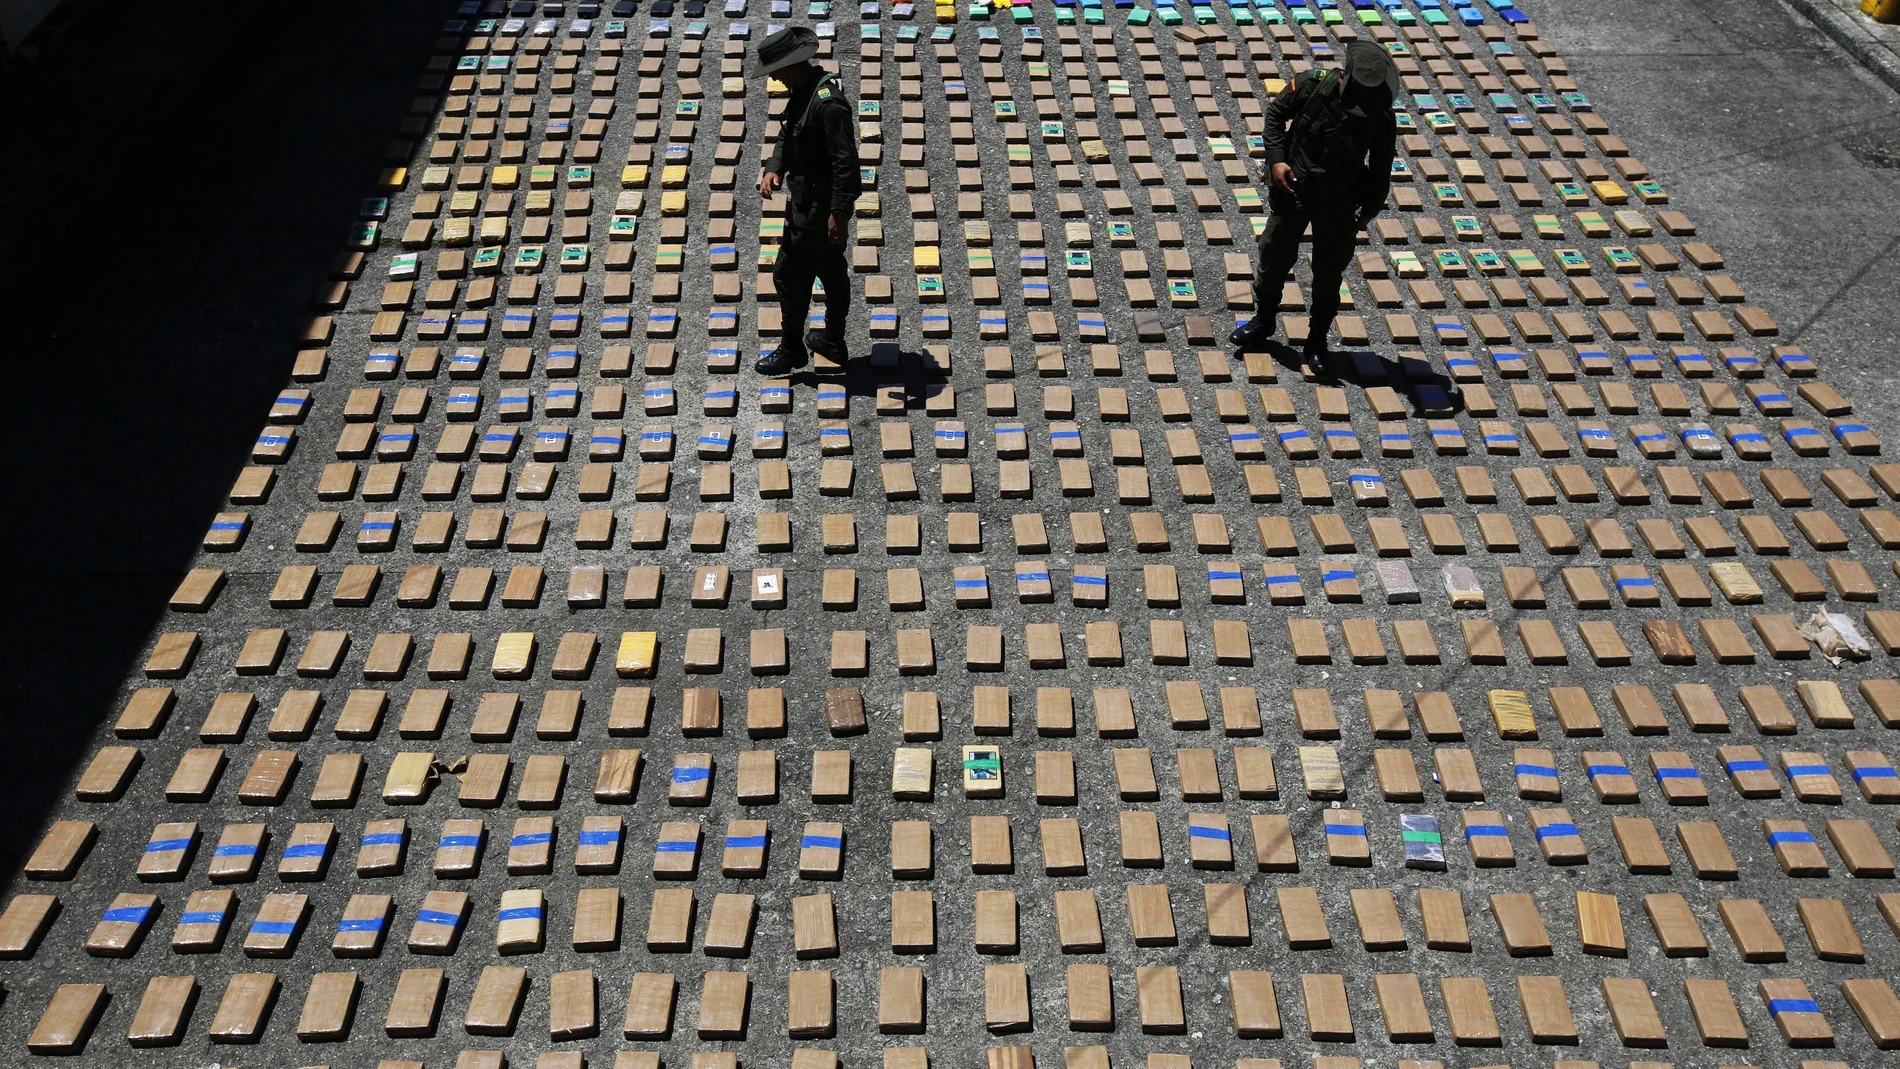 FILE - In this Thursday, Aug. 10, 2017 file photo, police officers walk among packages of seized cocaine at the Pacific port of Buenaventura, Colombia, after about one ton of cocaine was seized in a container during an operation by counternarcotics police at the port. In 2018, Capt. Juan Pablo Mosquera, a Colombian national police officer who was part of an elite unit that worked closely with U.S. anti-narcotics agents, was extradited to Miami to stand trial on charges he betrayed the U.S. Drug Enforcement Administration to the same traffickers they were jointly fighting. (AP Photo/Fernando Vergara)